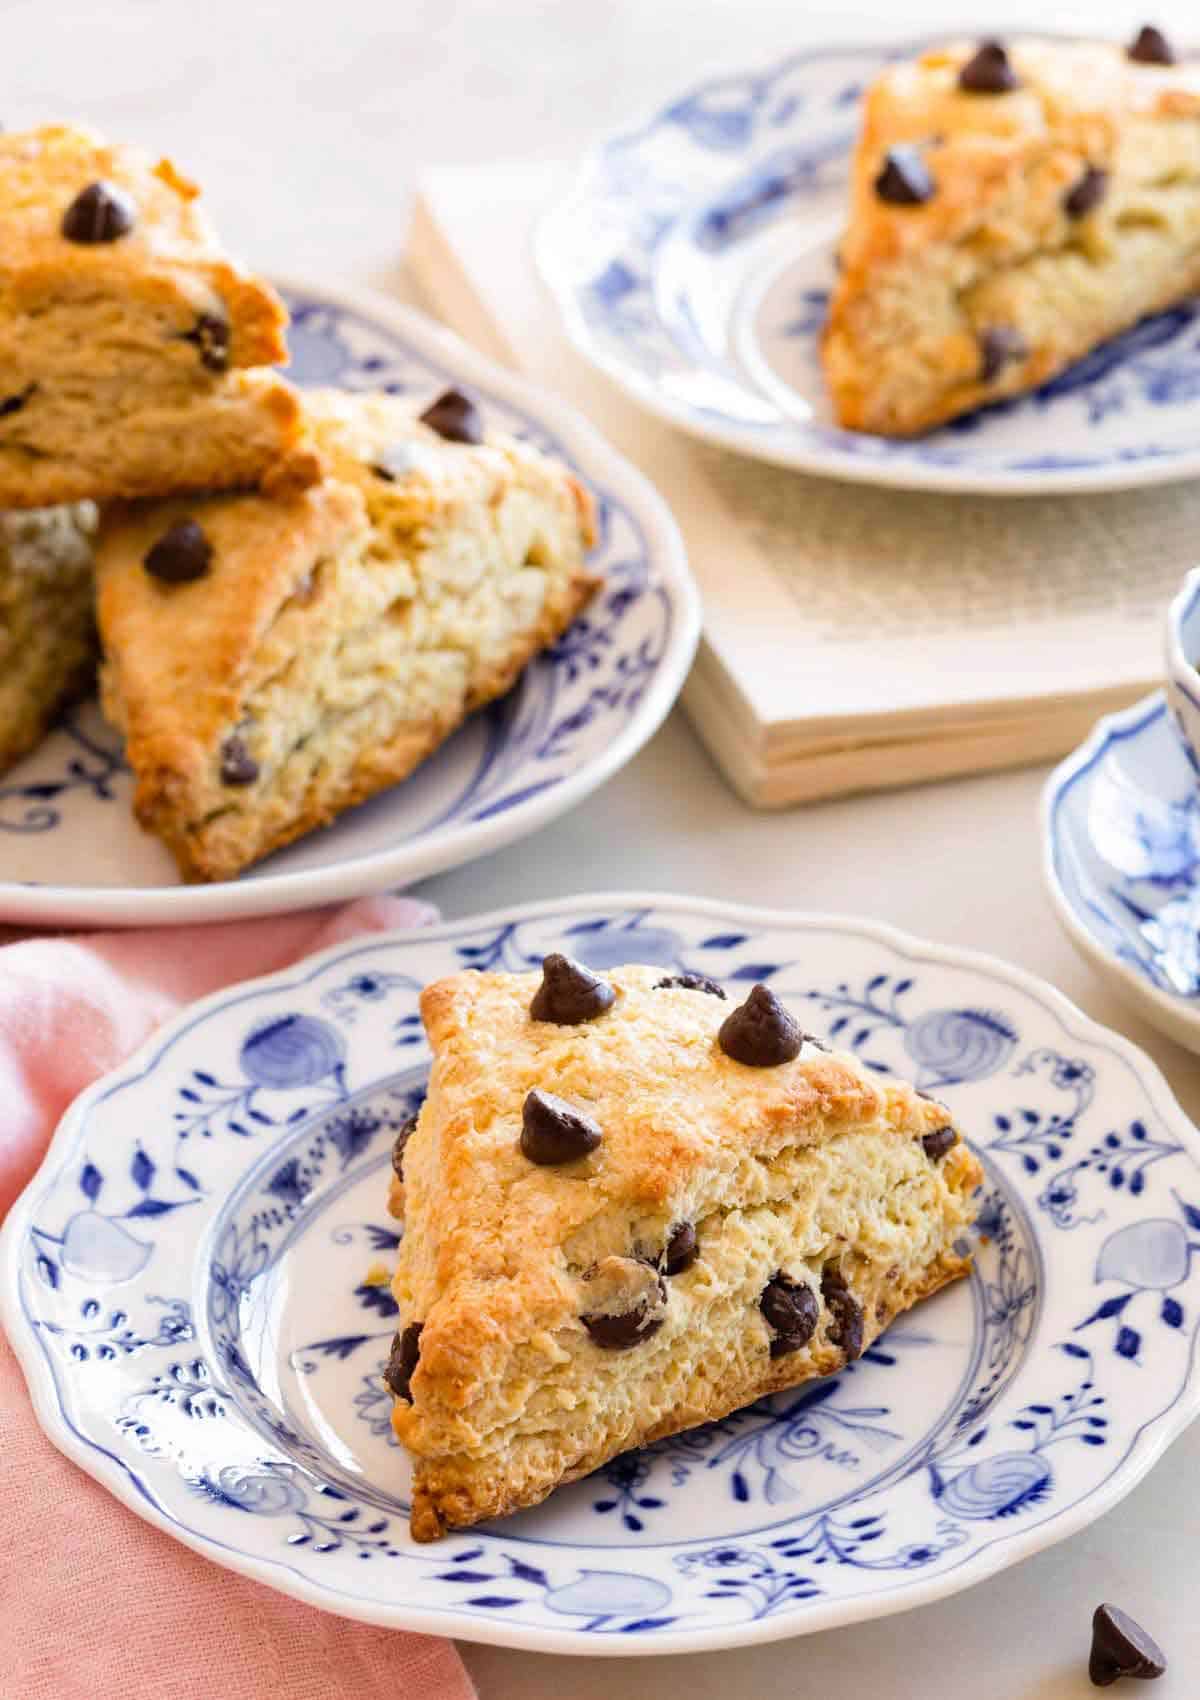 A chocolate chip scone on a plate with more in the background.